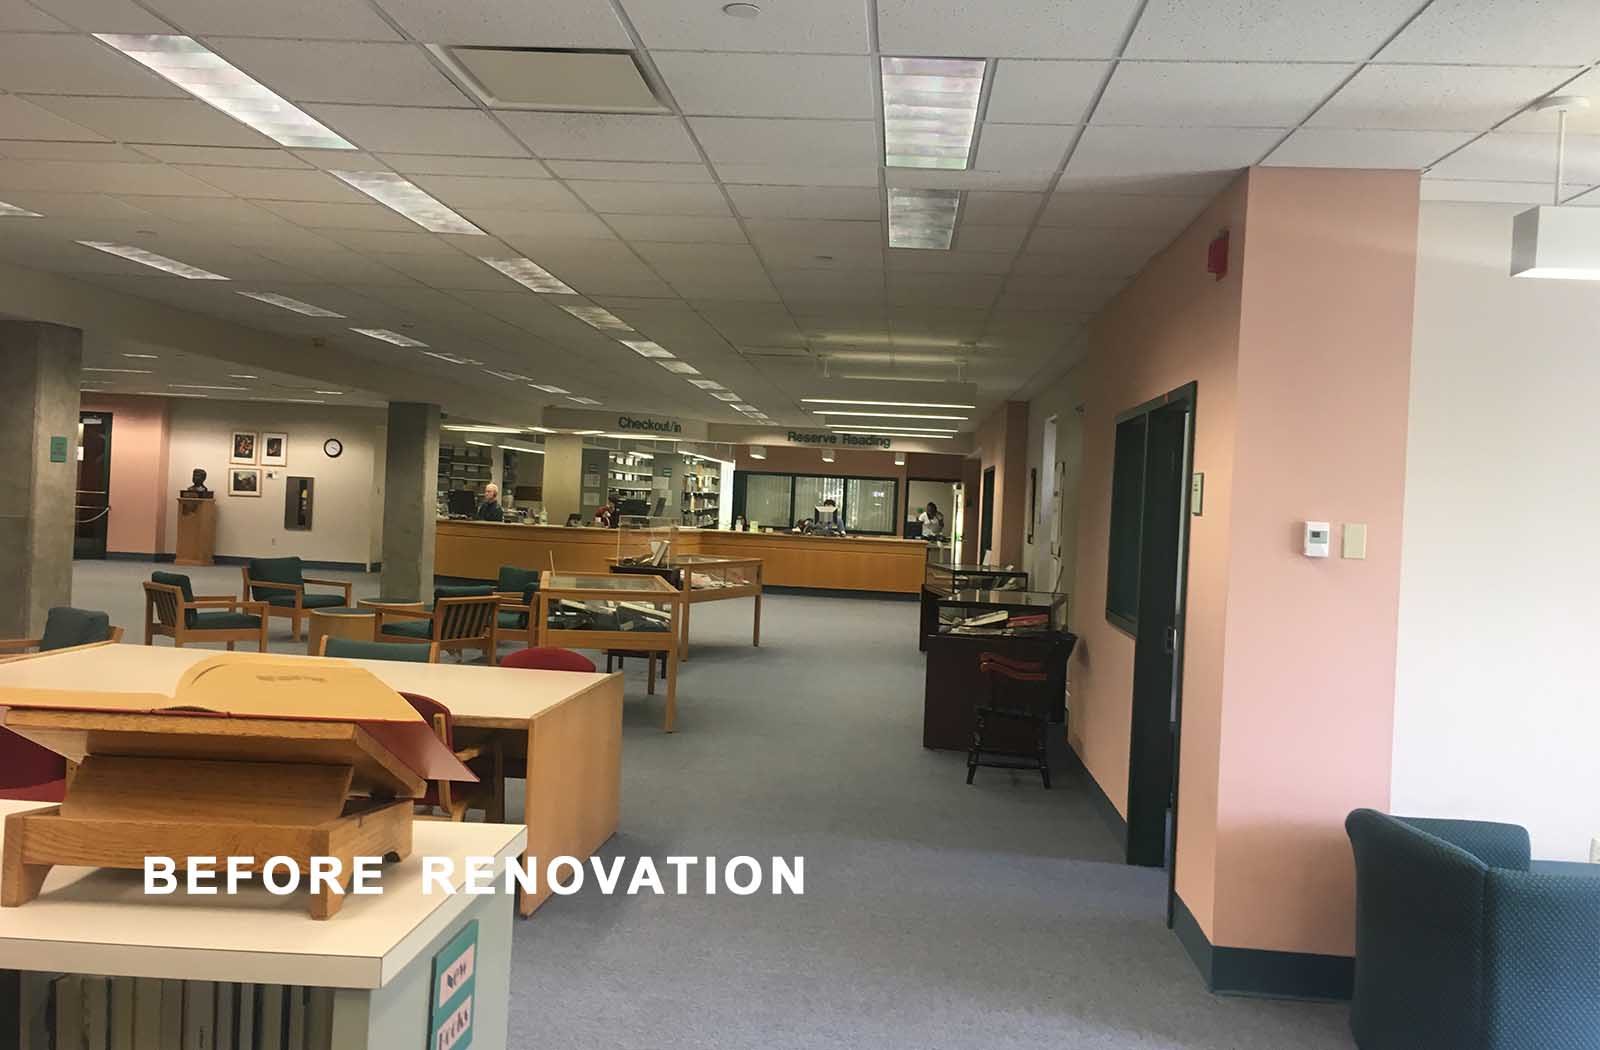 La Salle Connelly Library - Before pods